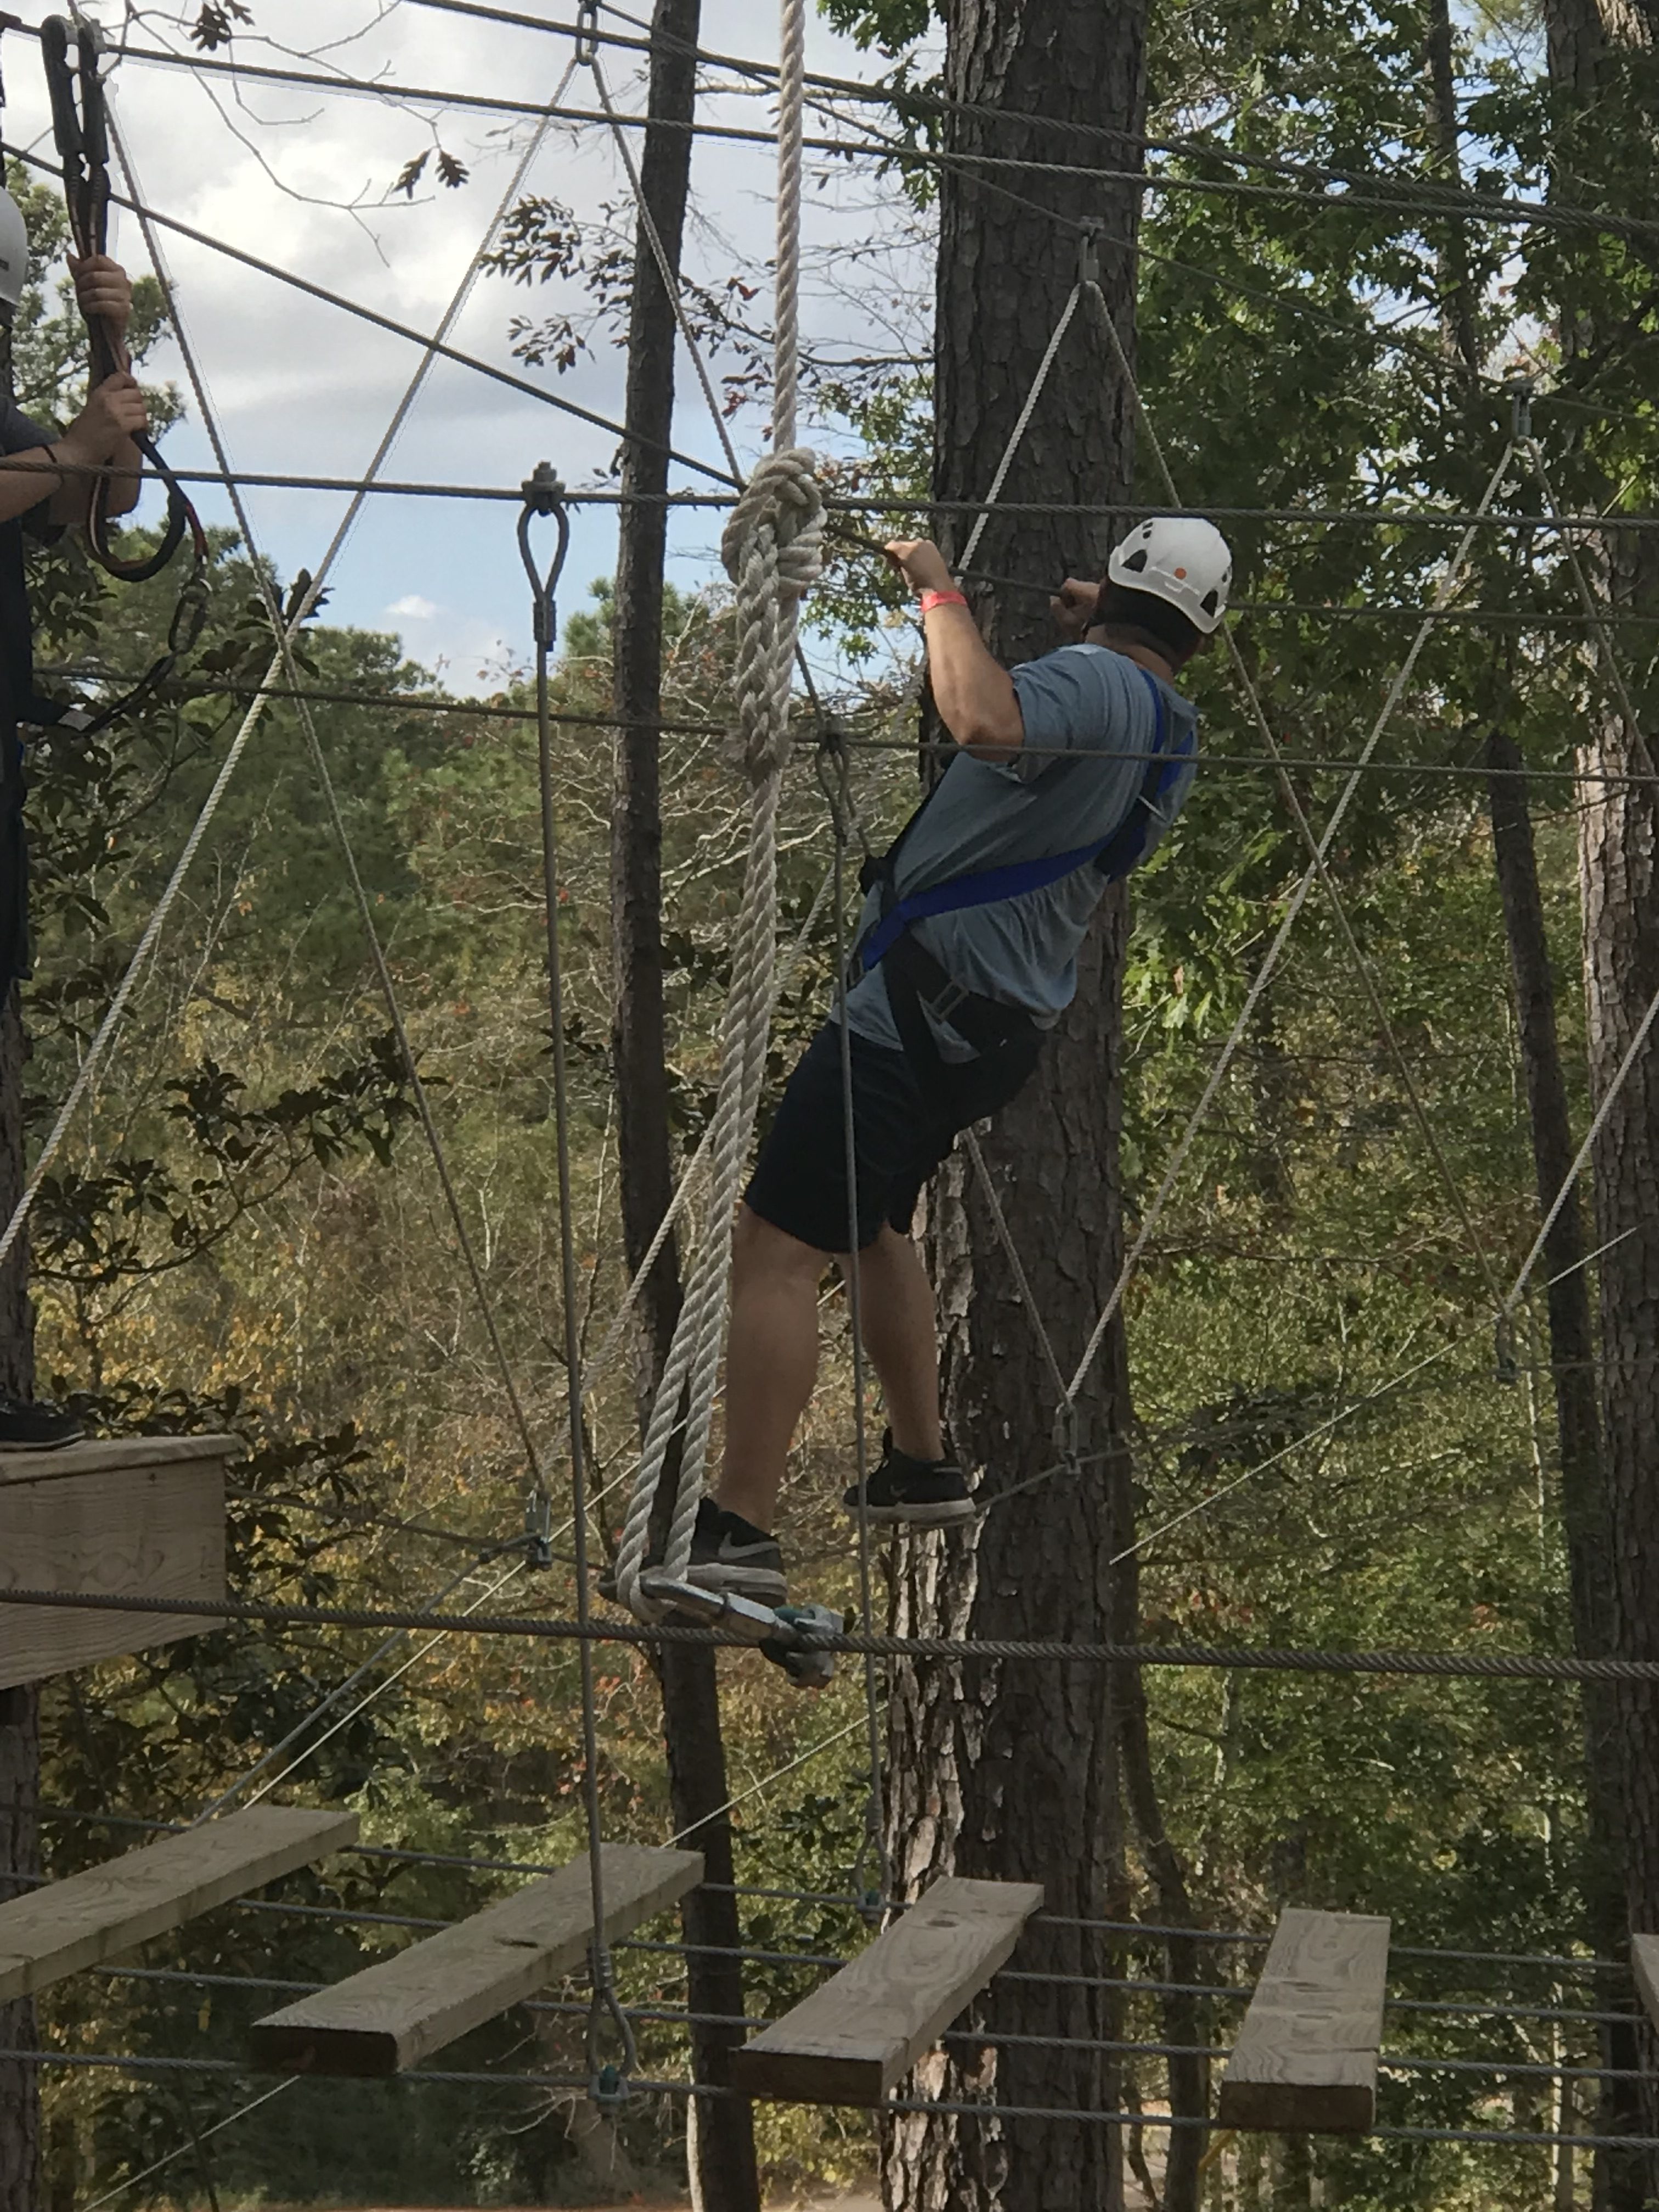 Student Body President Justin Murphy carefully calculates his next move on the tight rope obstacle. Photo courtesy of Diveanne Martinez, SGA Vice President - Committee Coordinator.